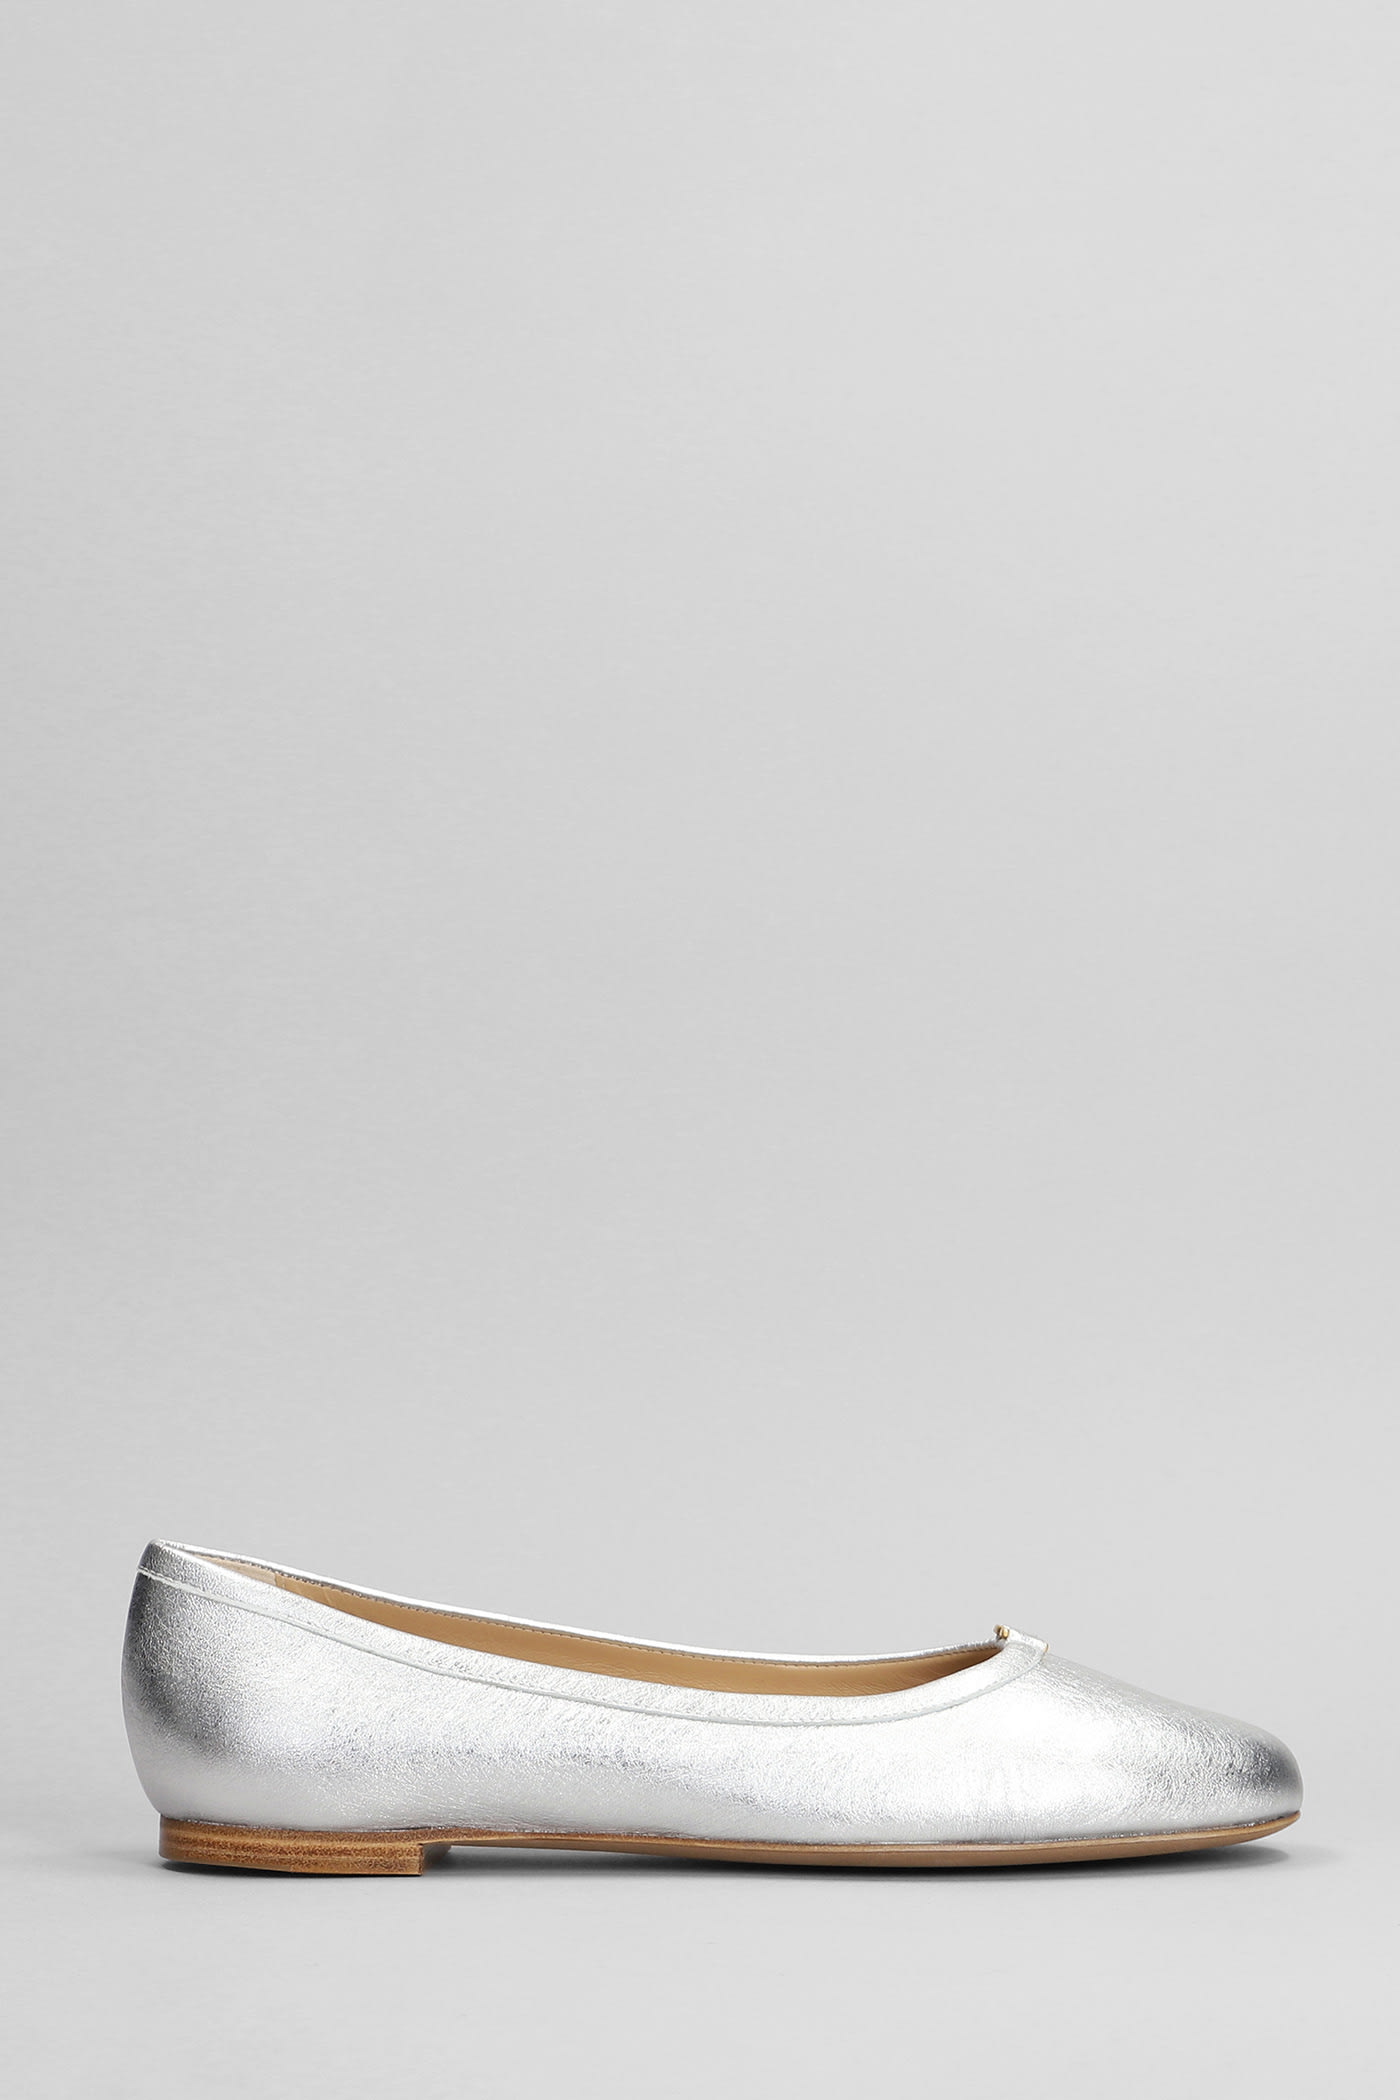 Chloé Mercie Ballet Flats In Silver Leather